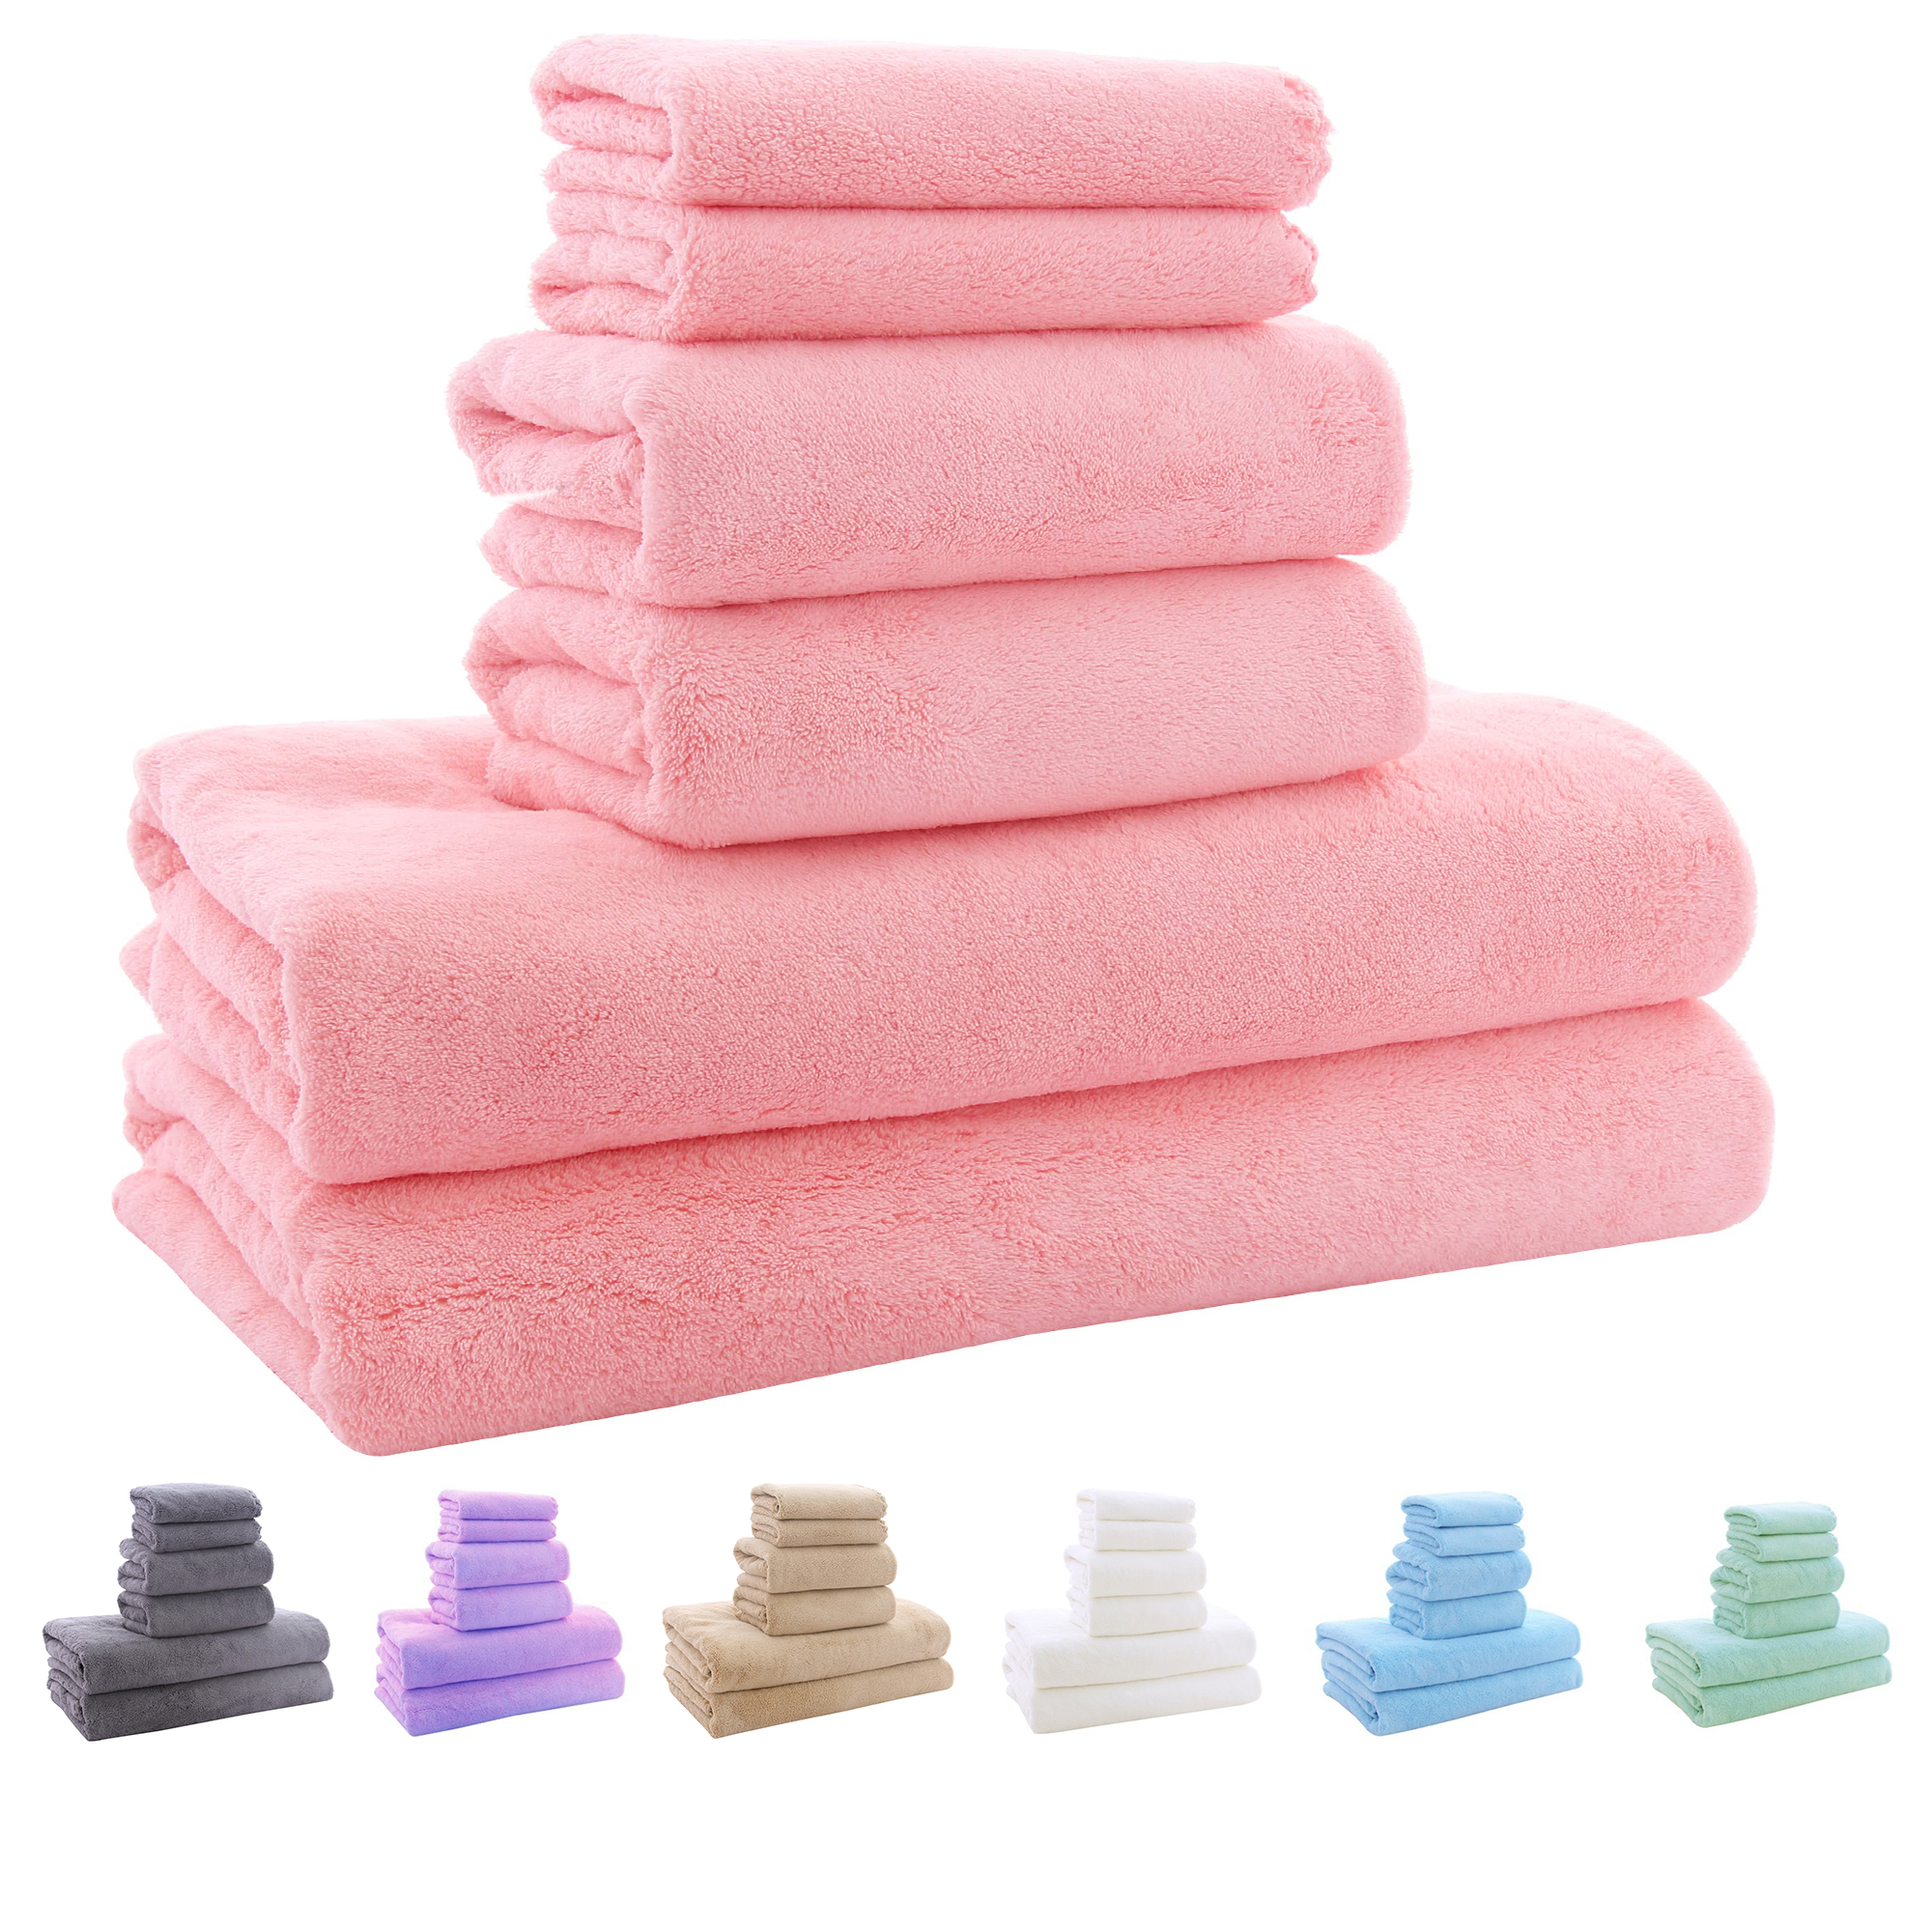 3Pieces Set Premium Cotton Towel Set Thicken Plush Hand Towel Extra Large  Bath Towels for The Body Home Hotel Spa Towel Bathroom - AliExpress